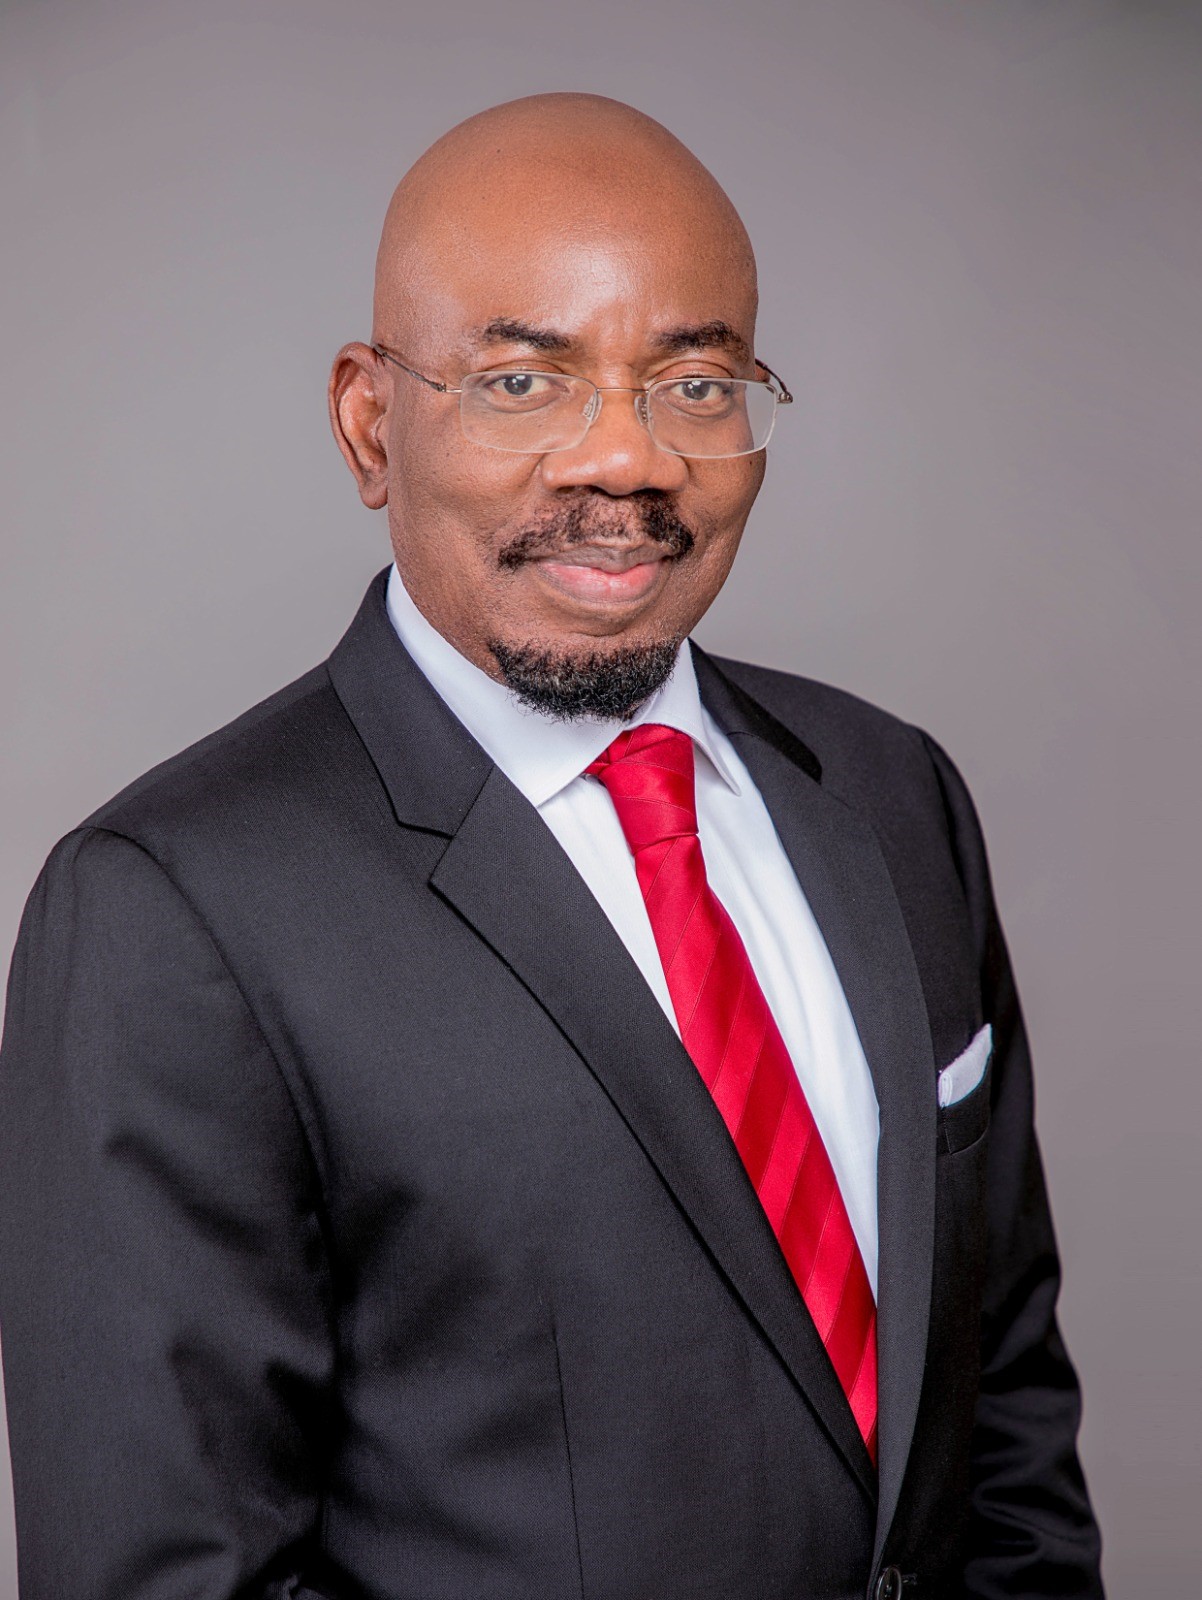 PRESIDENT TINUBU APPOINTS NIGERIA’S RENOWNED BANKER, JIM OVIA AS CHAIRMAN OF THE NIGERIAN EDUCATION LOAN FUND